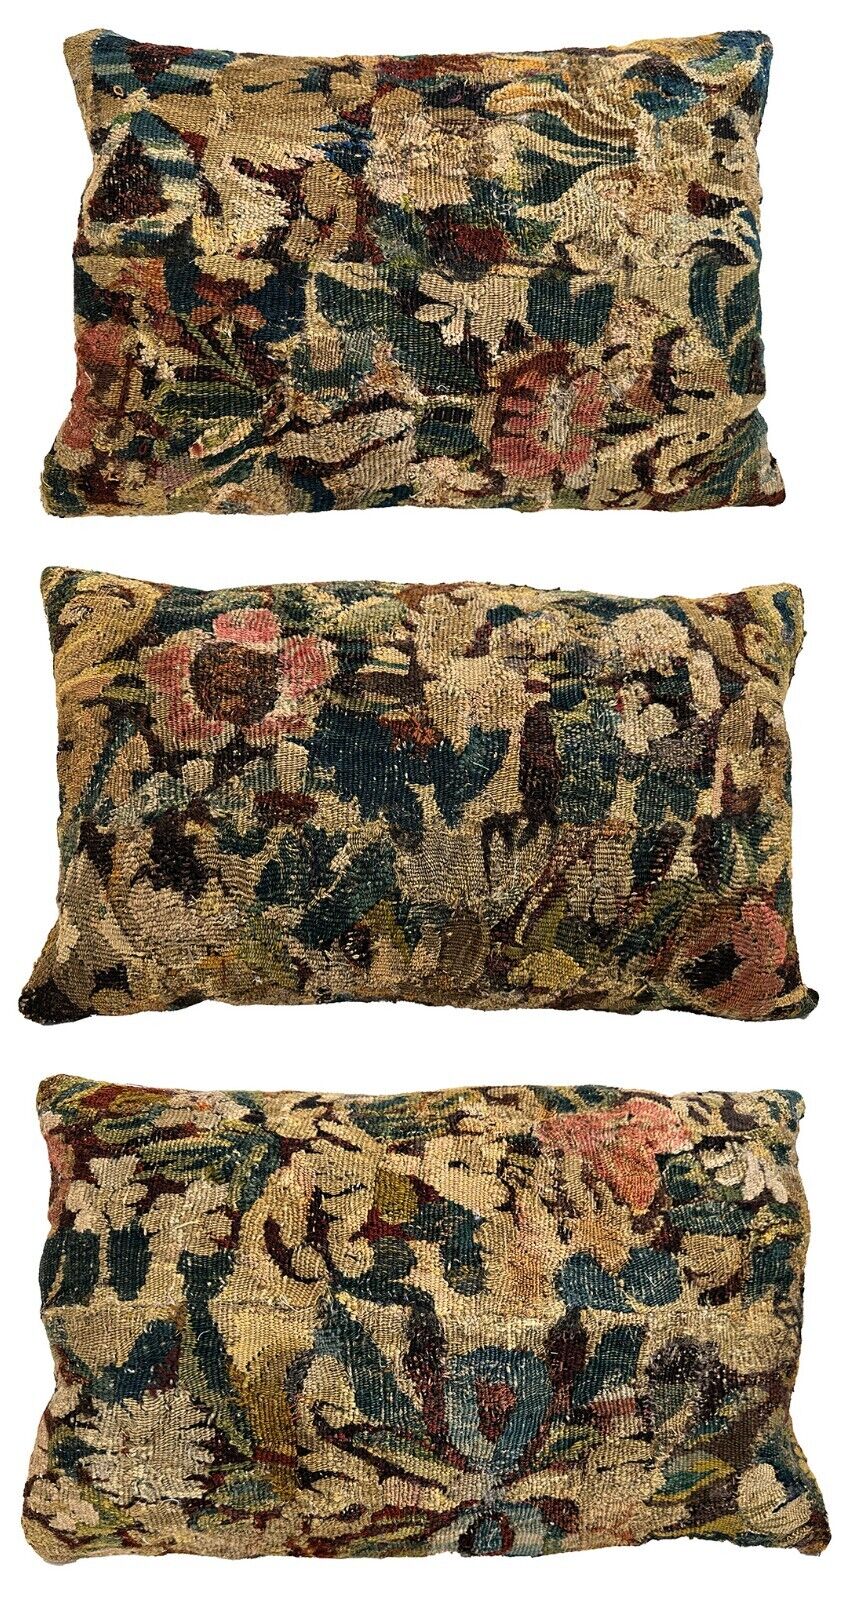 17th C. Brussels Tapestry Fragment Pillow (3 Available)